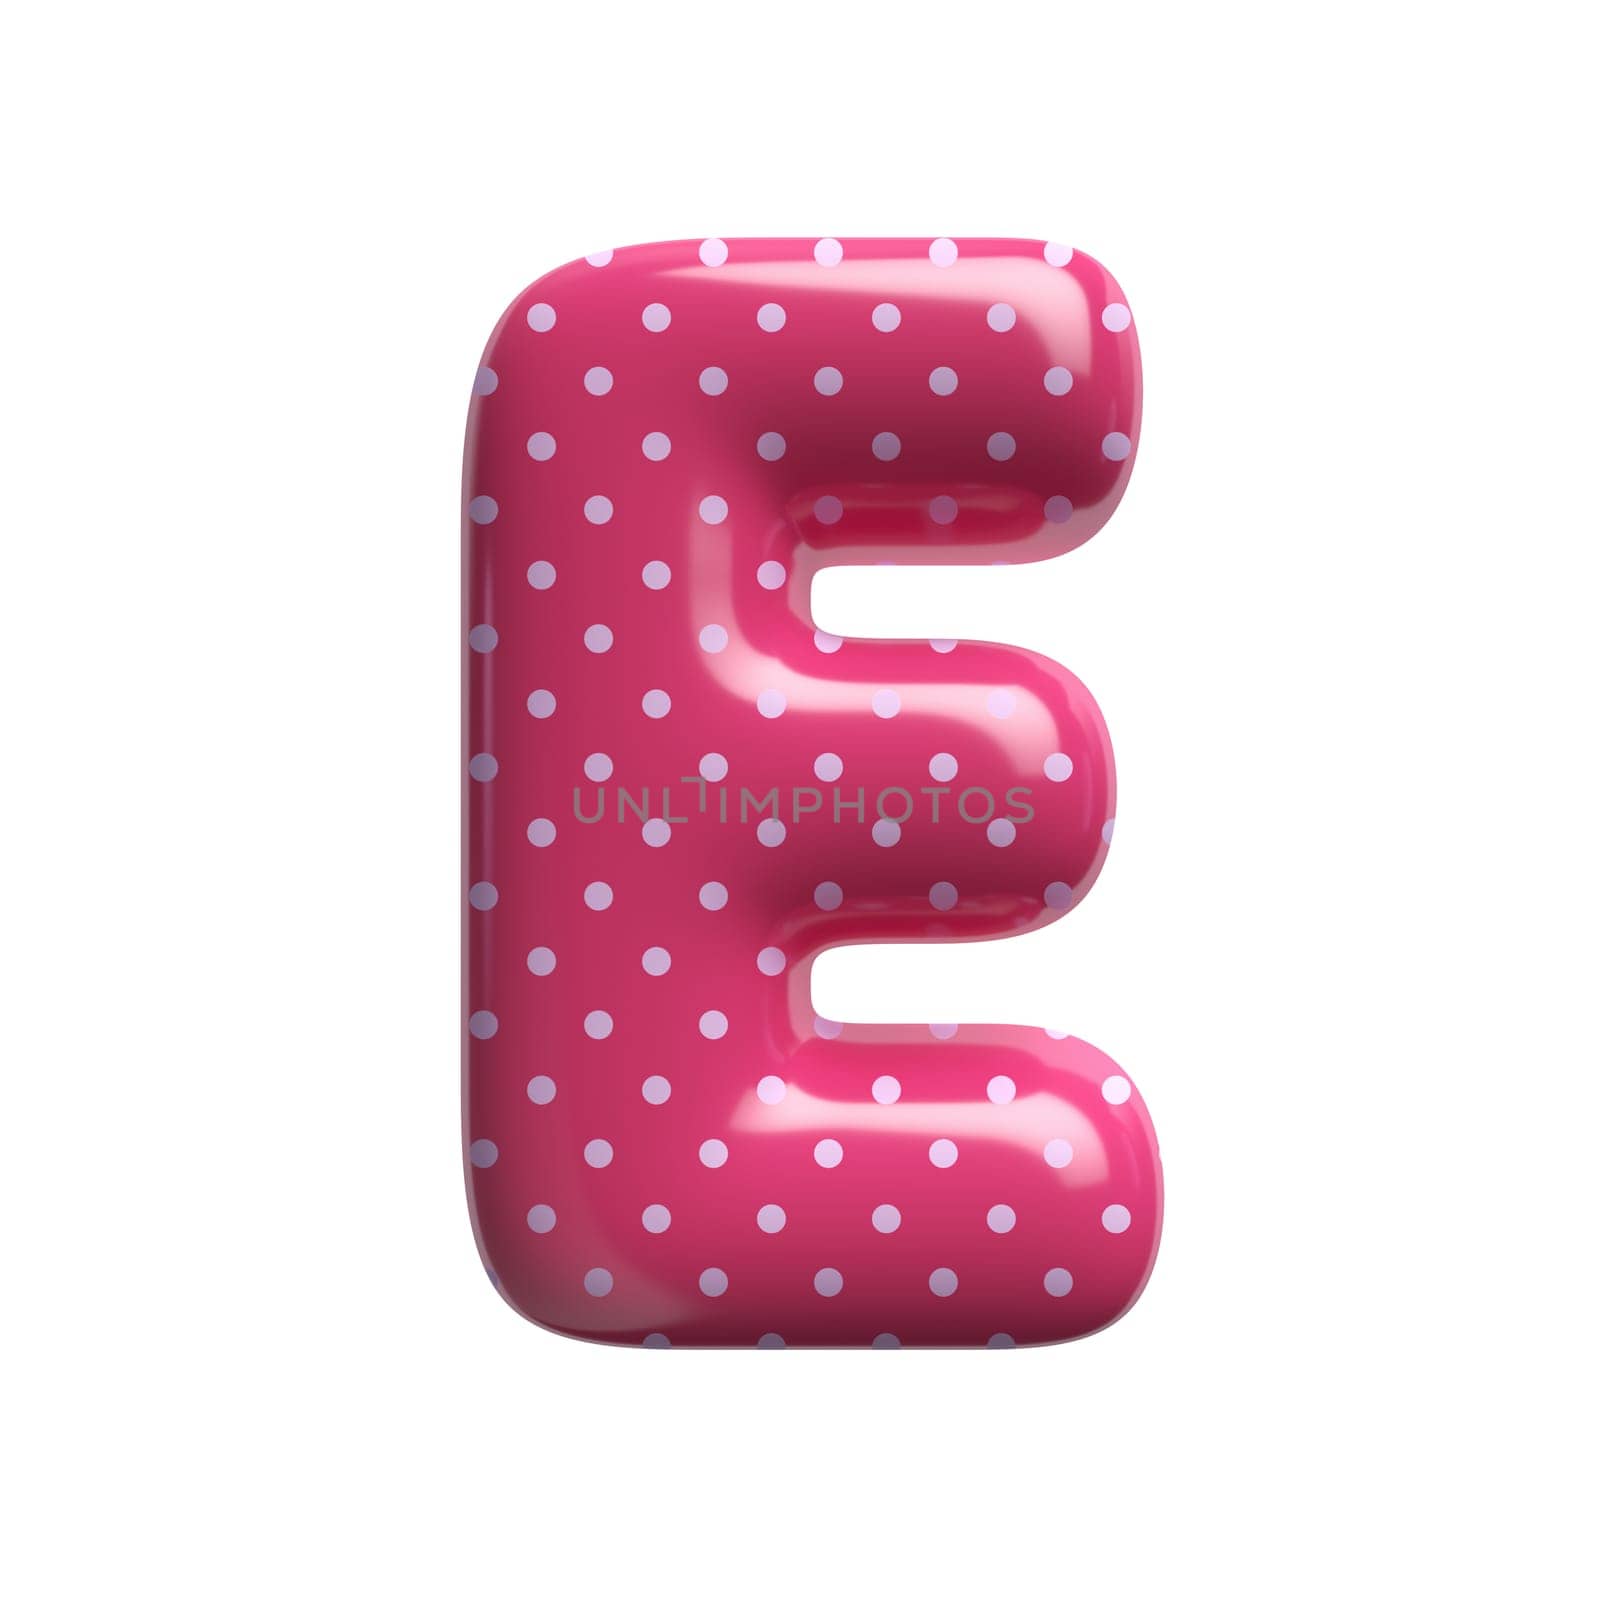 Polka dot letter E - Capital 3d pink retro font - suitable for Fashion, retro design or decoration related subjects by chrisroll